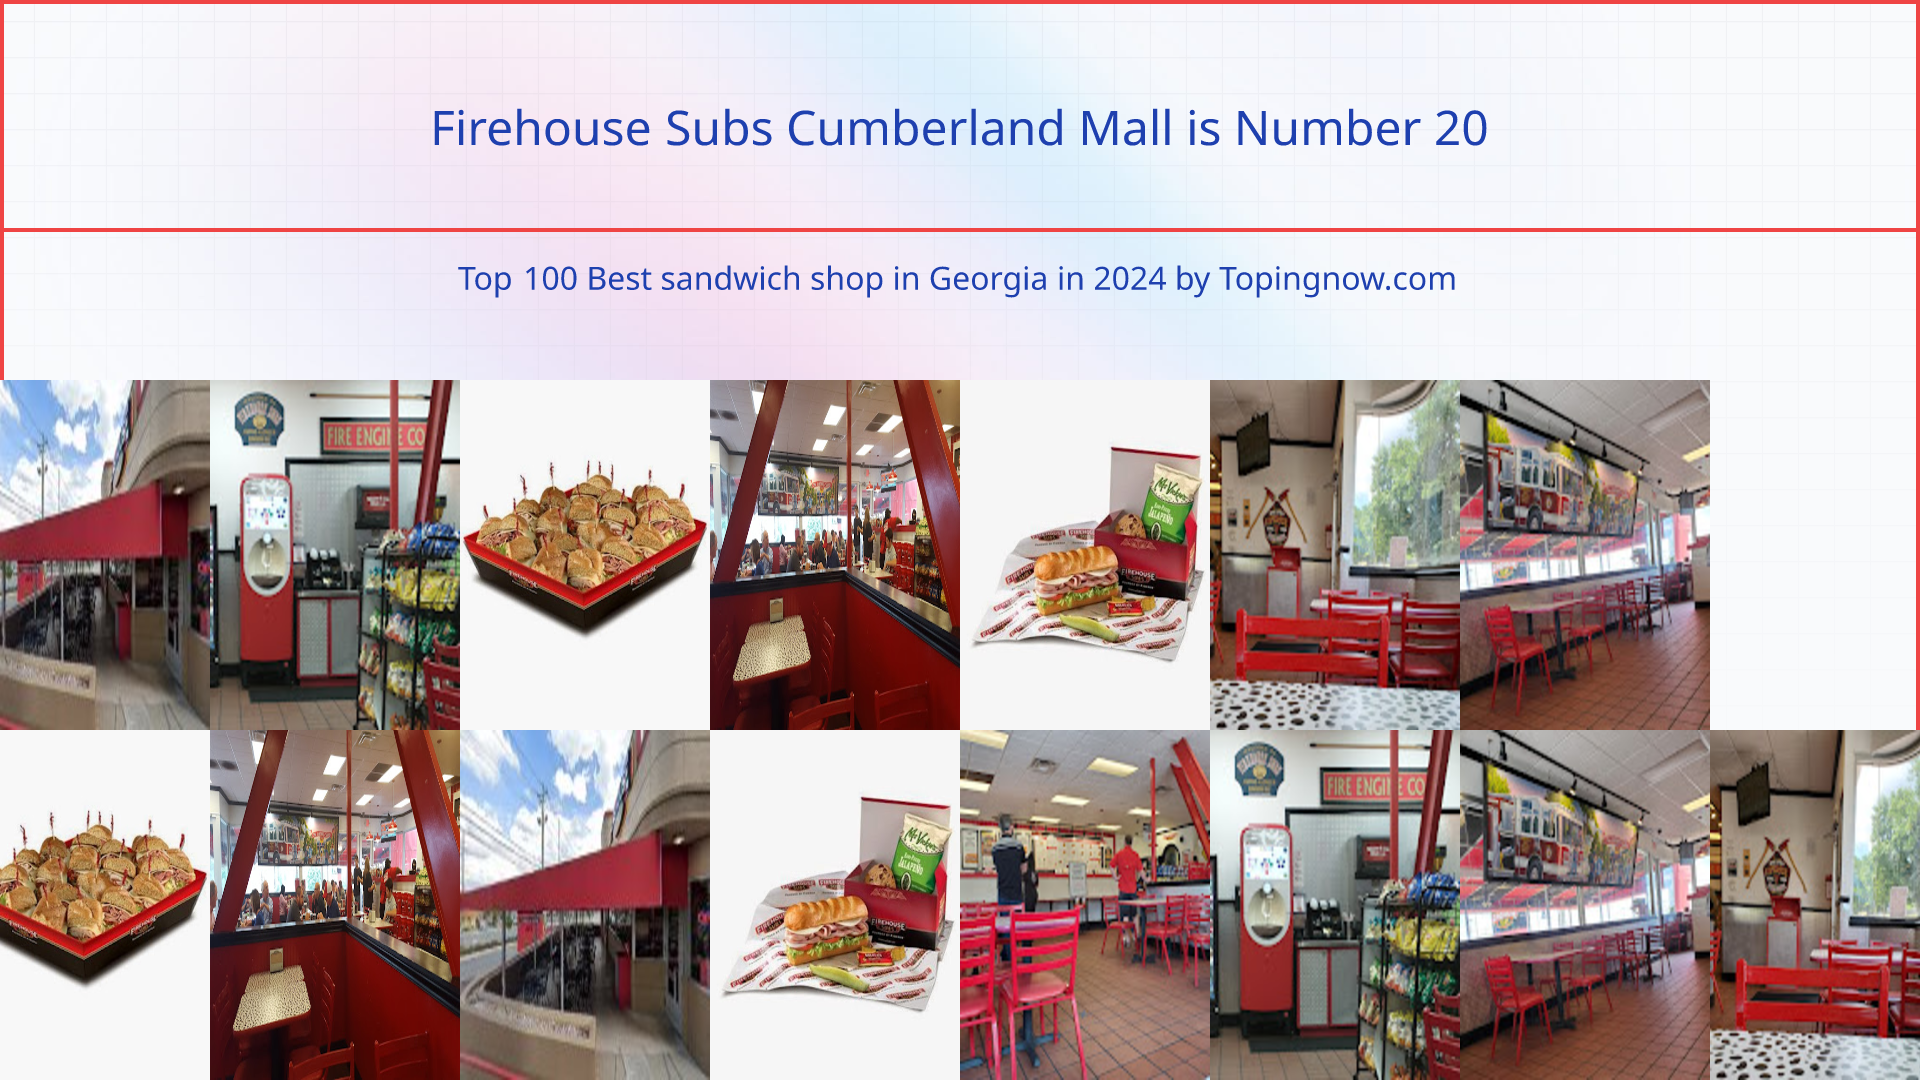 Firehouse Subs Cumberland Mall: Top 100 Best sandwich shop in Georgia in 2024